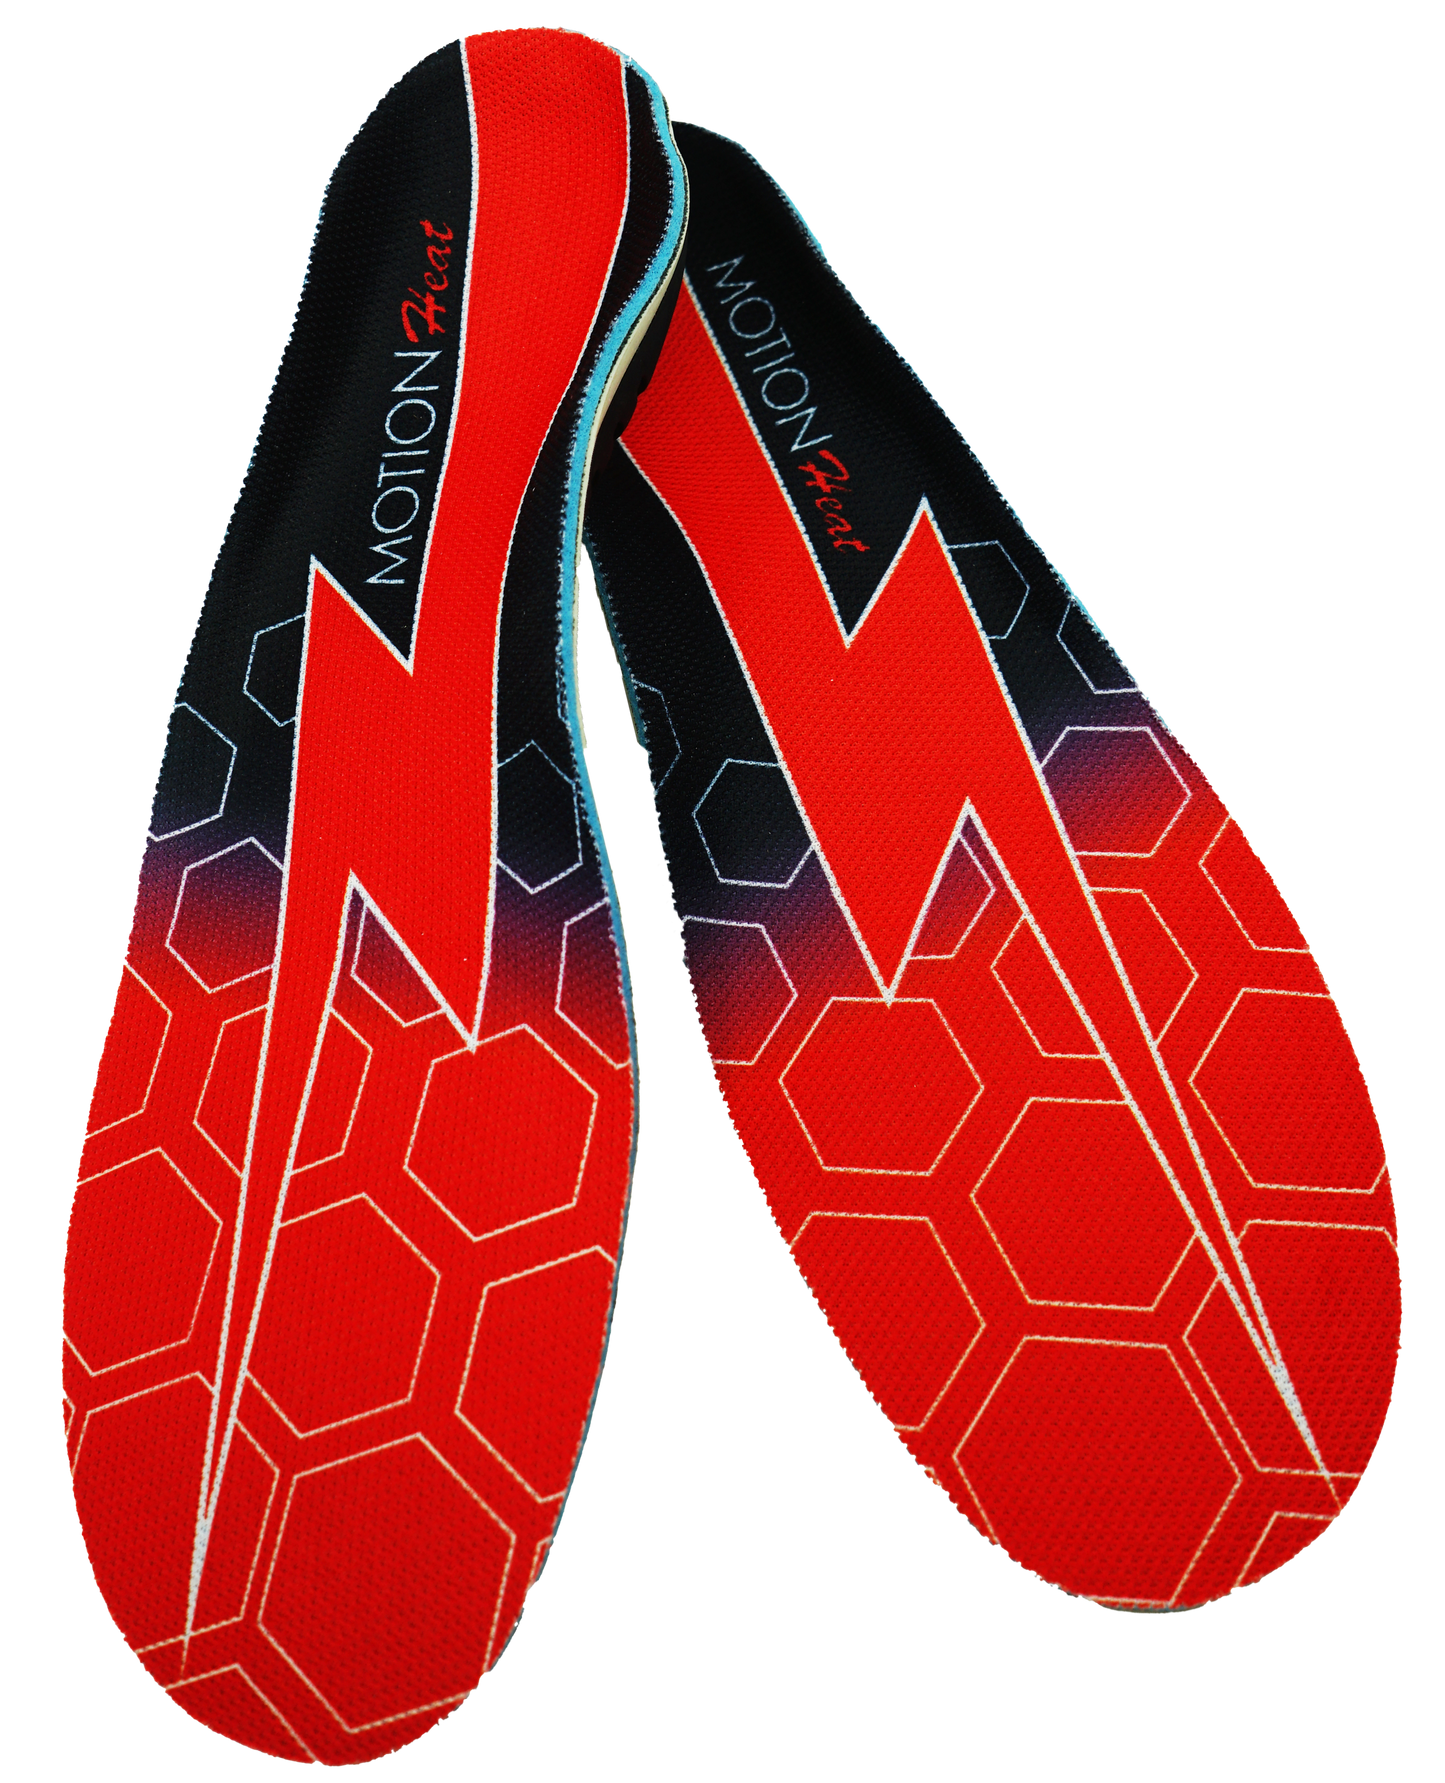 Heated Insoles - Complete Set - Motion Heat Canada